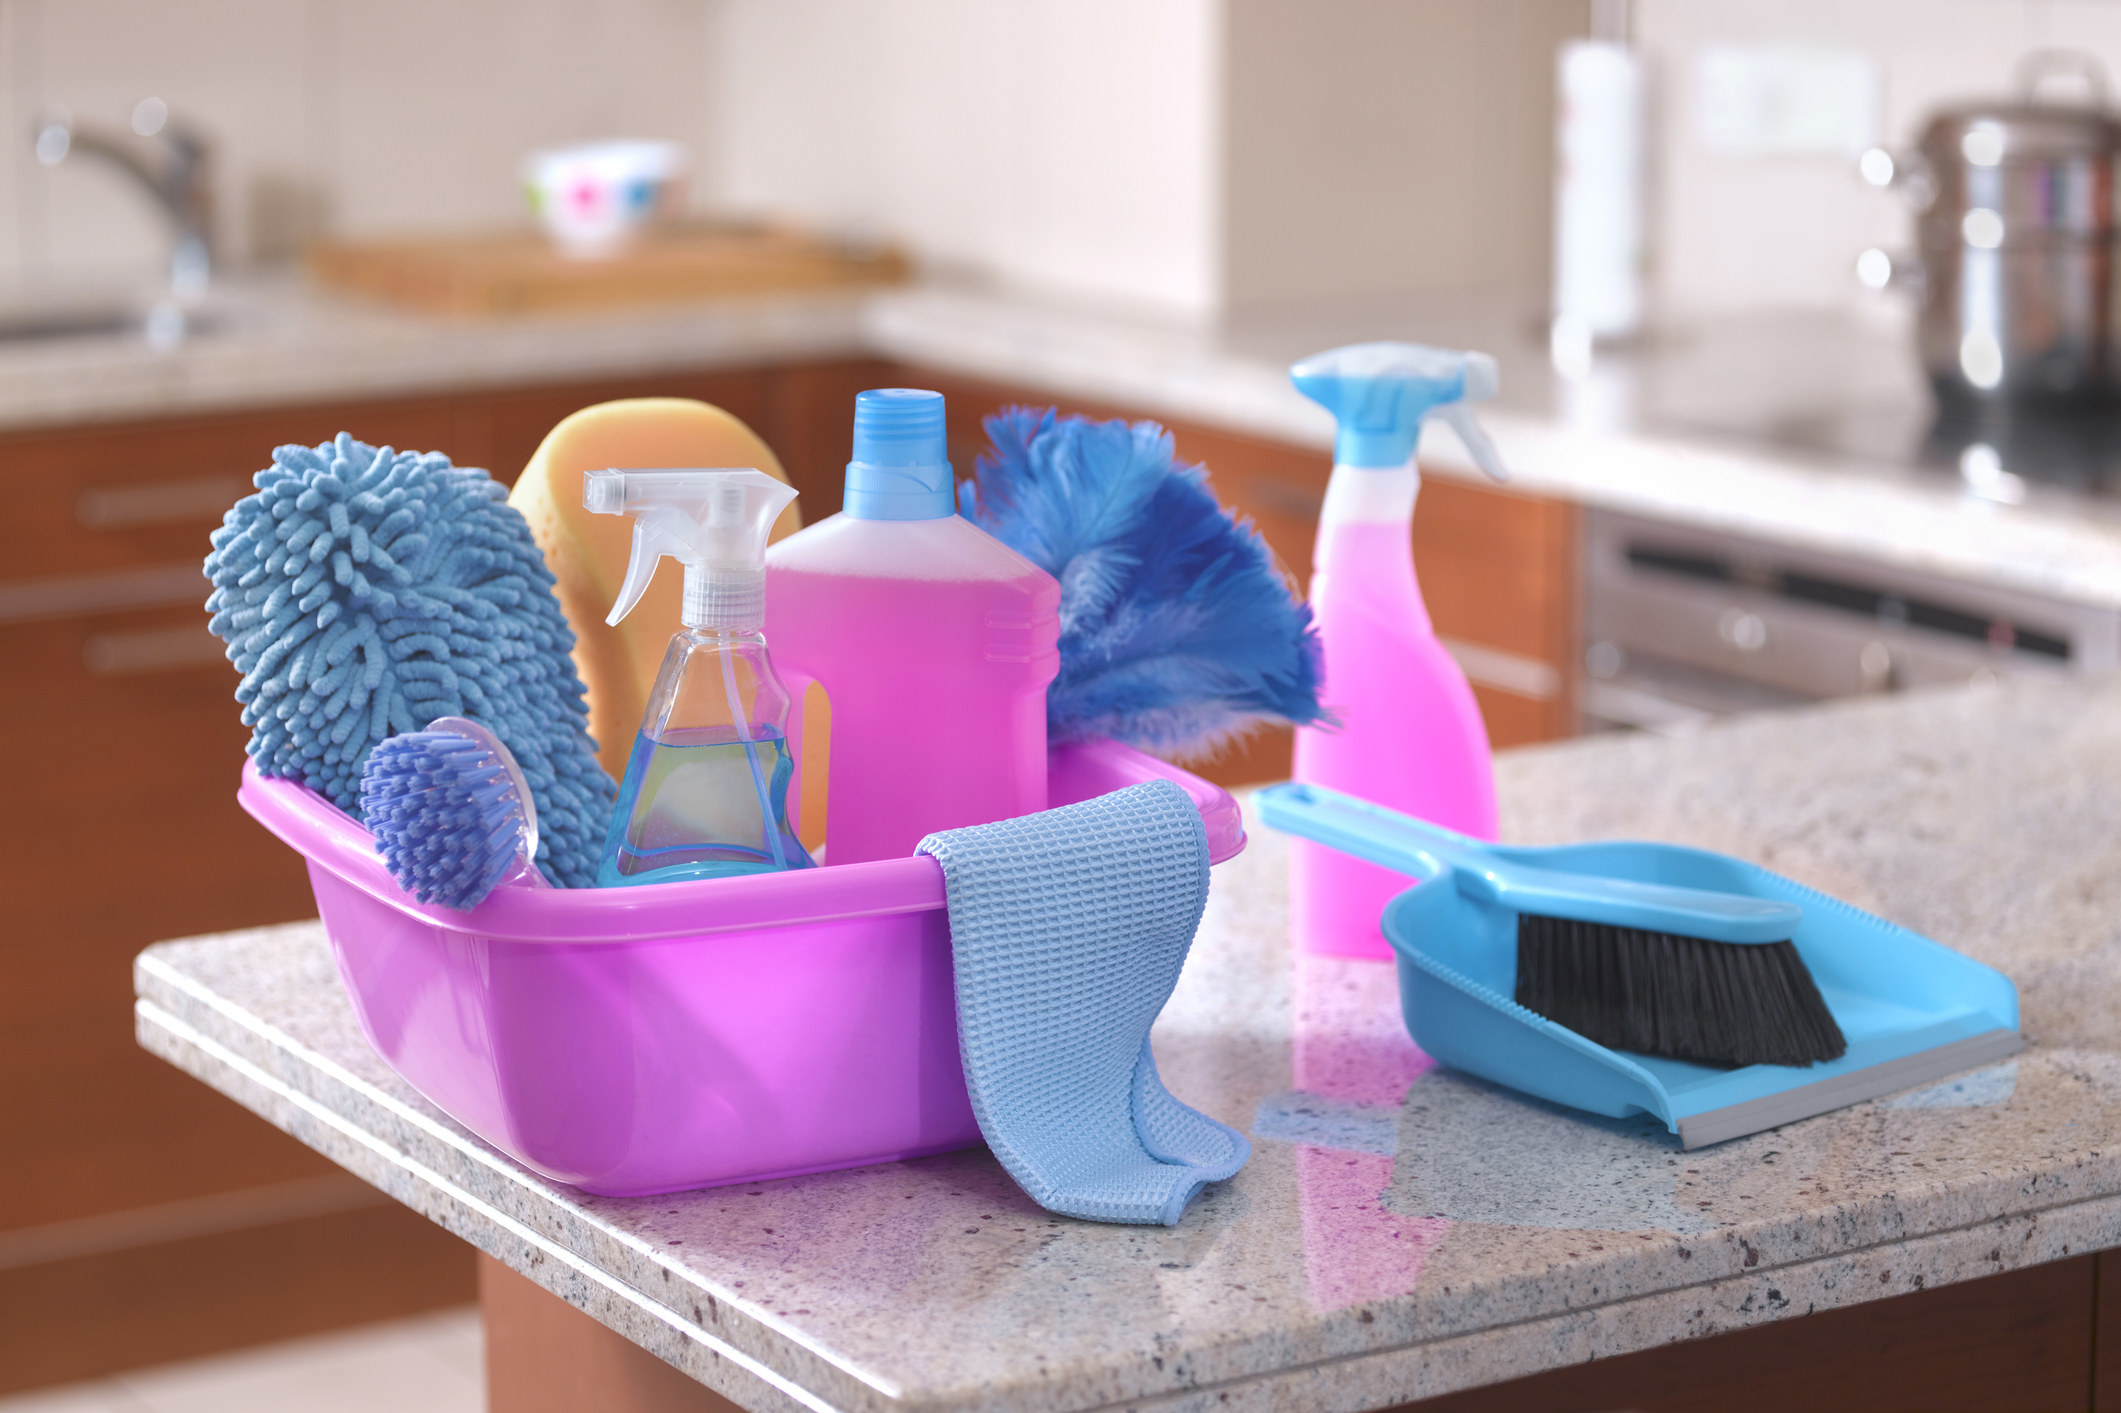 cleaning products on a kitchen counter